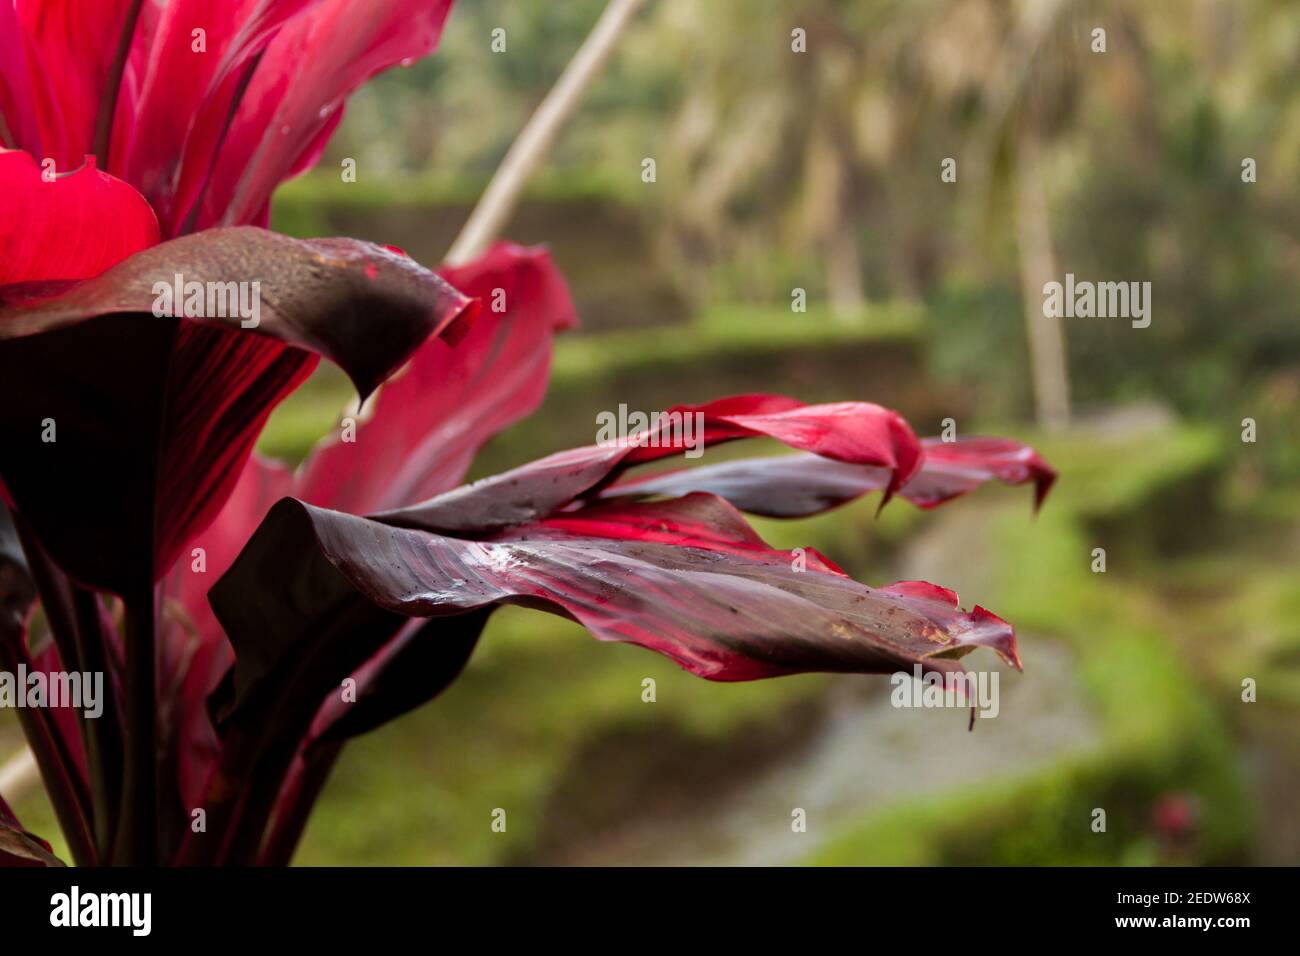 Close-up of the leaves of a pink flower at Tegallalang Rice Terrace in Bali Stock Photo